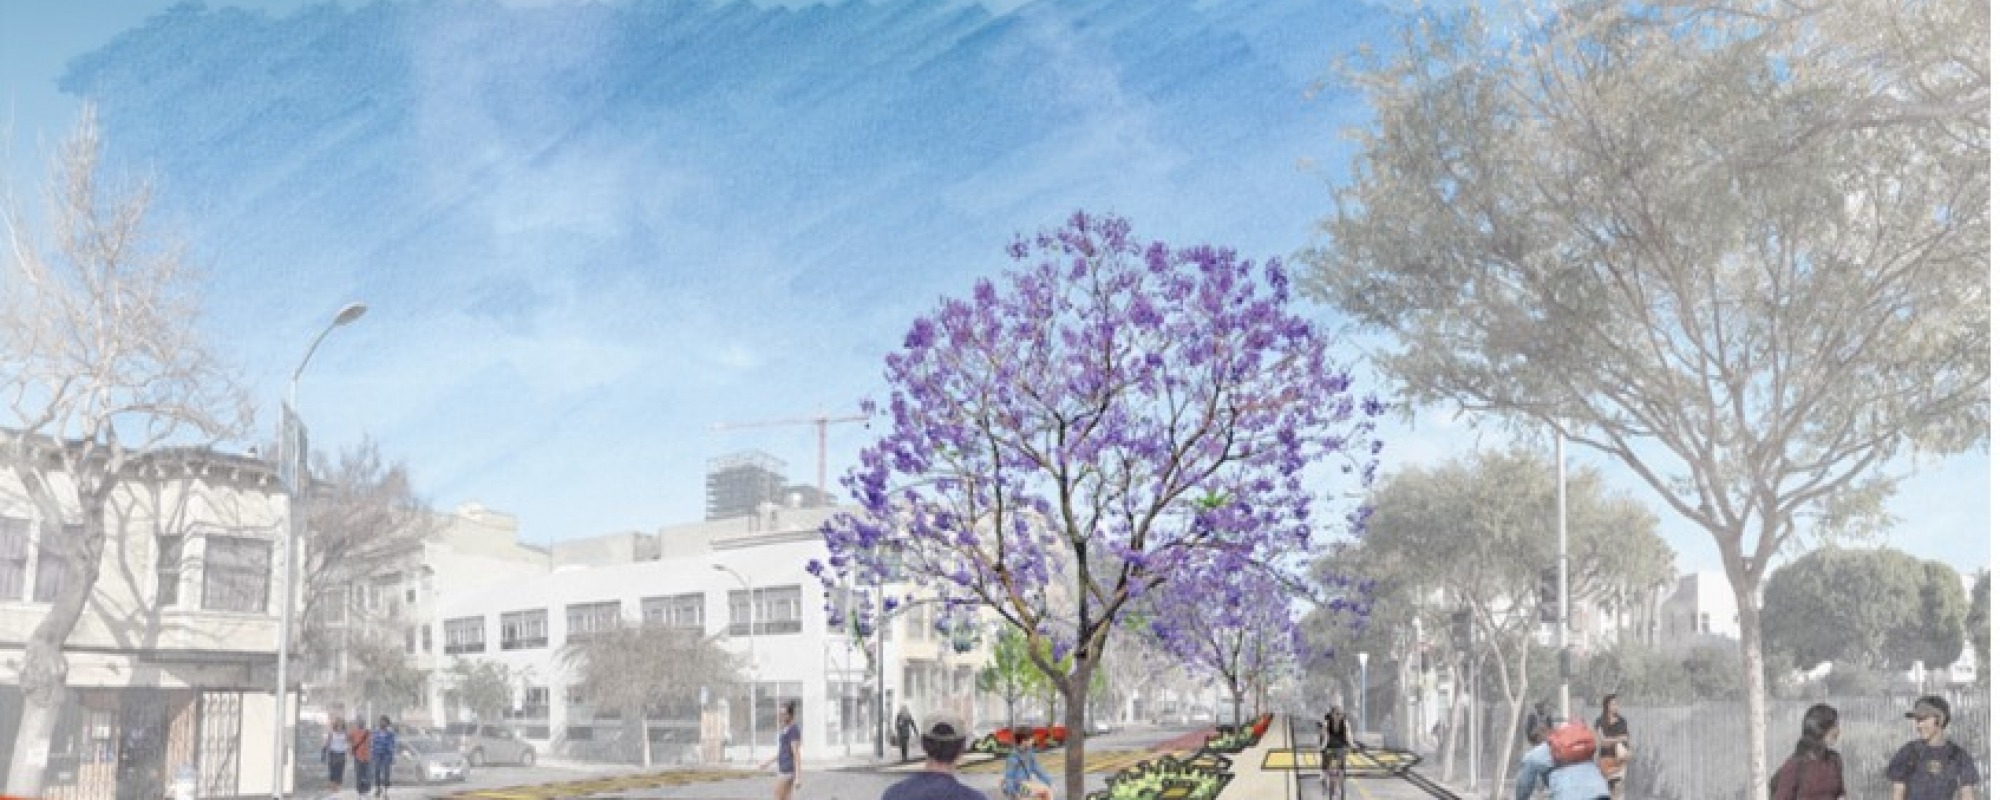 Folsom Streetscape Project Rendering image